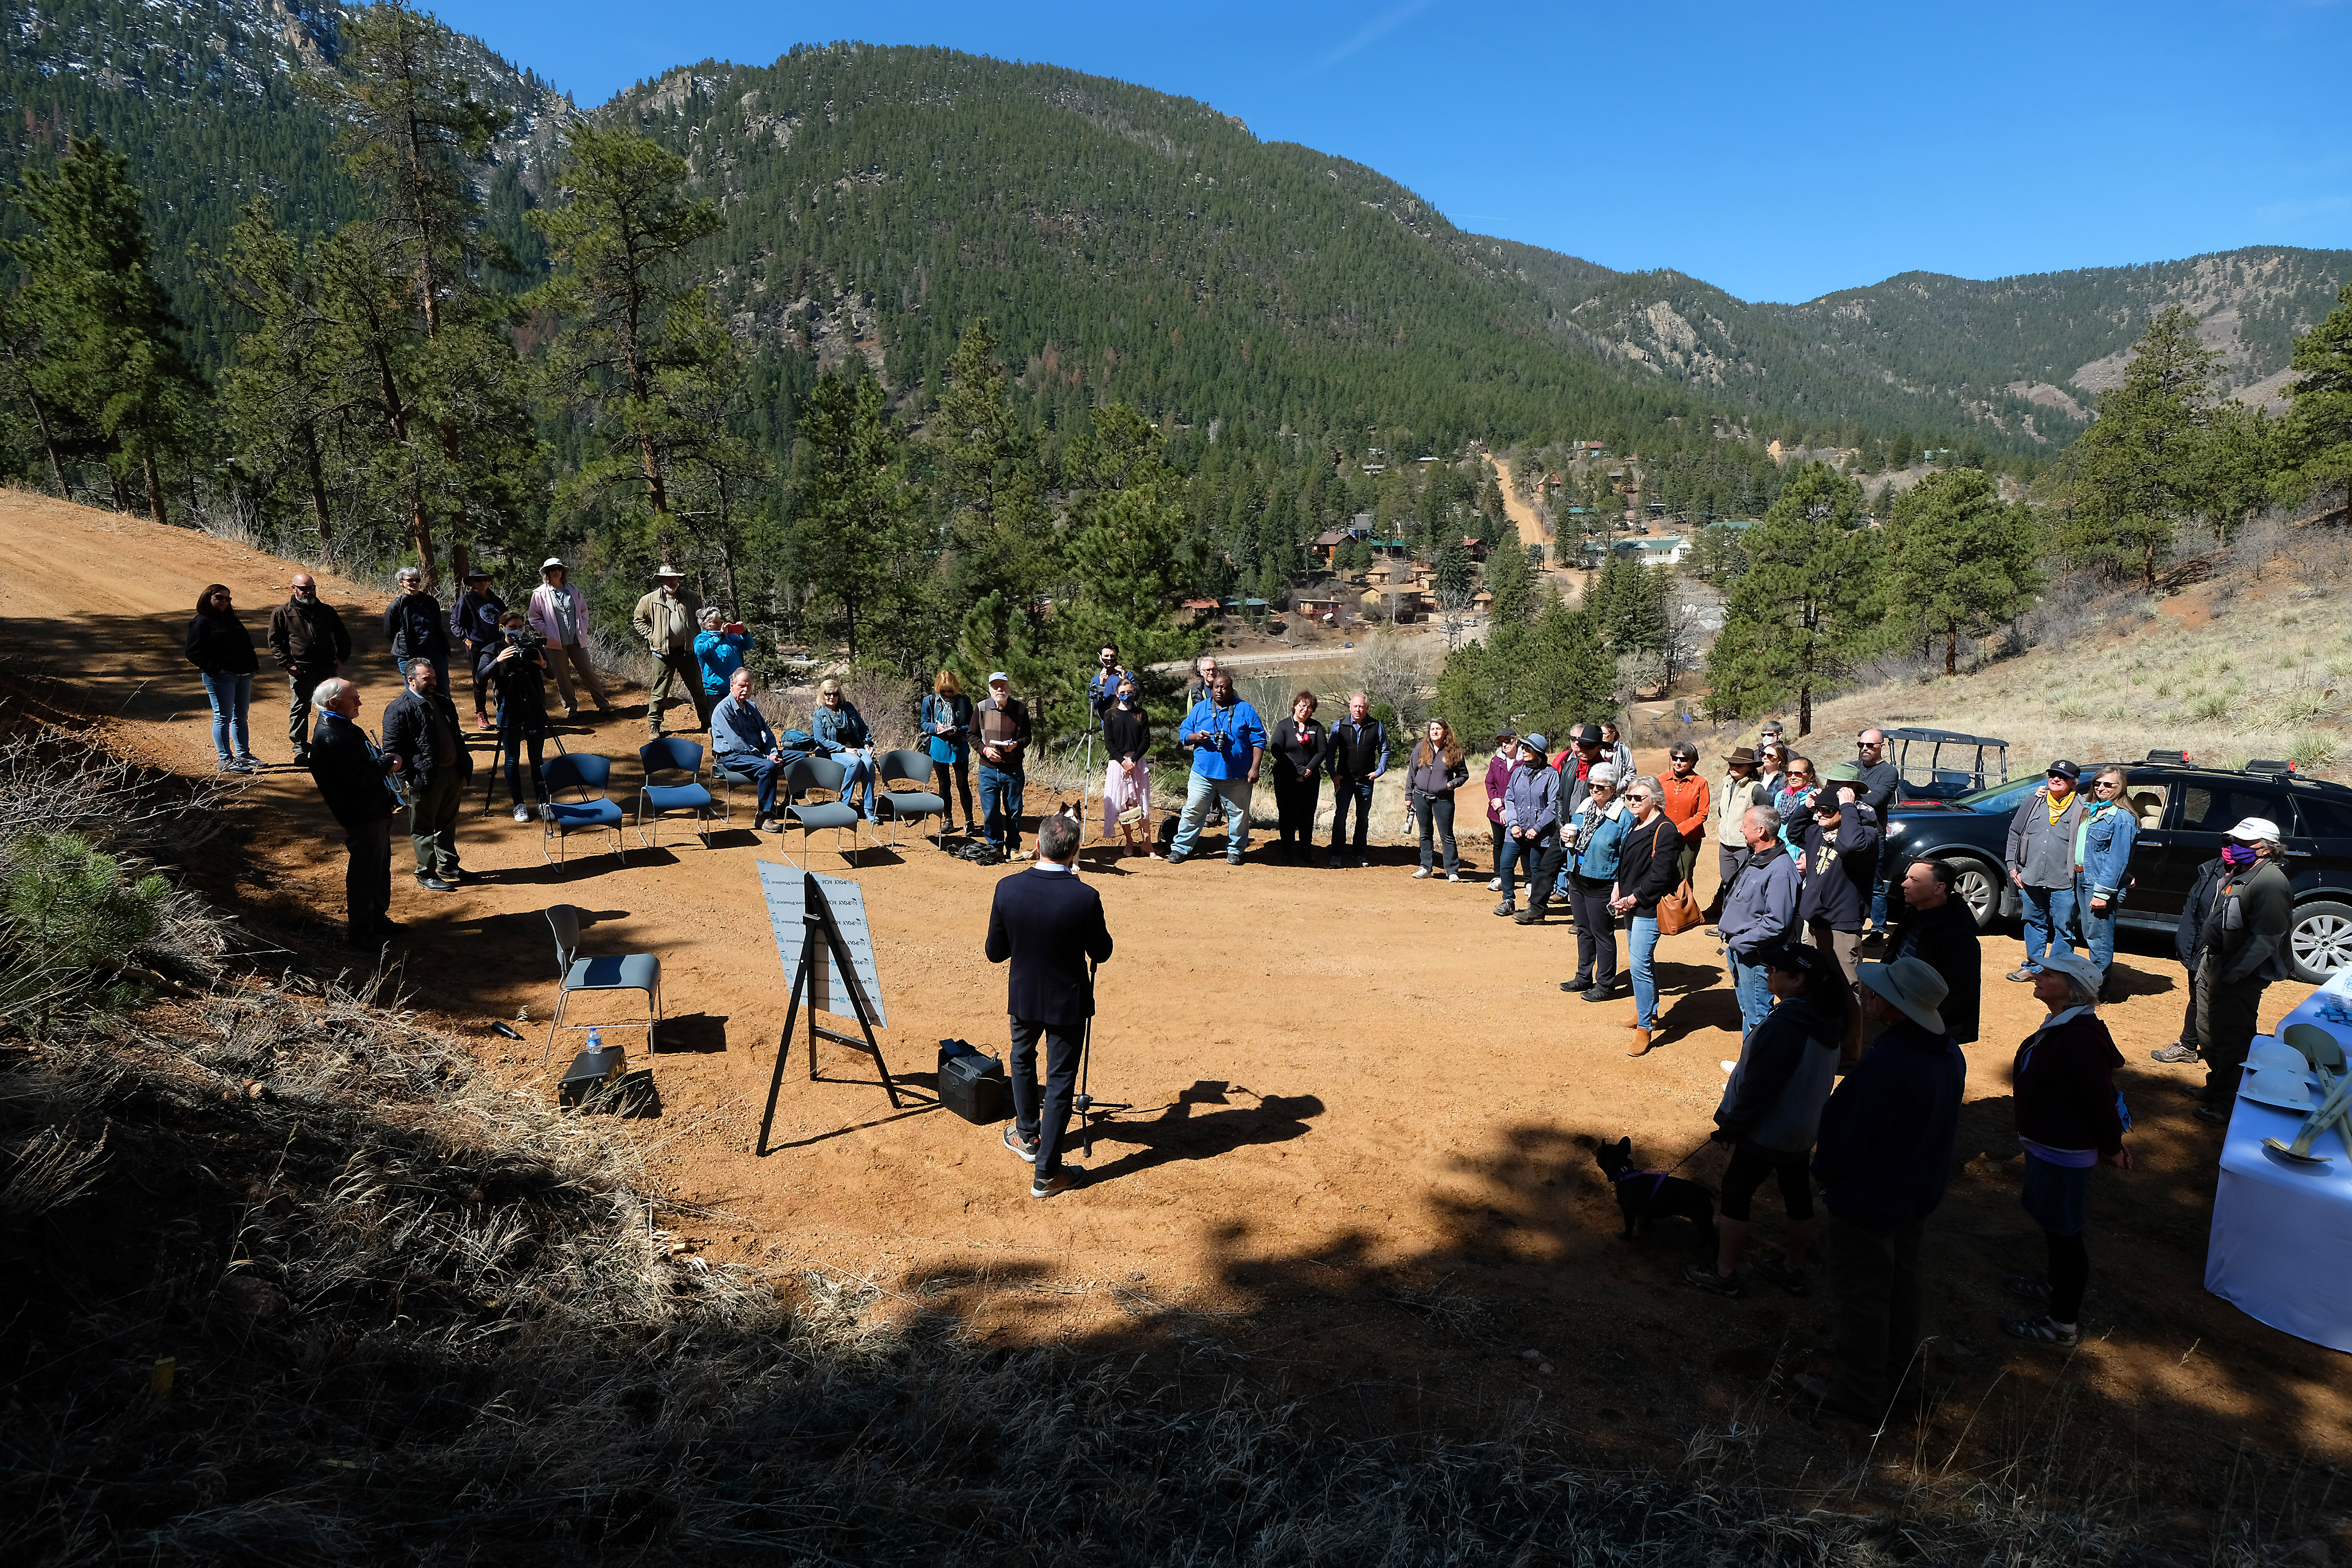 The Town of Green Mountain Falls and Green Box celebrated a groundbreaking for a new James Turrell Skyspace this weekend. Of his 85 Skyspaces around the world, this will be the first Turrell Sksypace to be nestled into the side of a mountain. Photo by: Tom Kimmell Photography, Colorado Springs.
